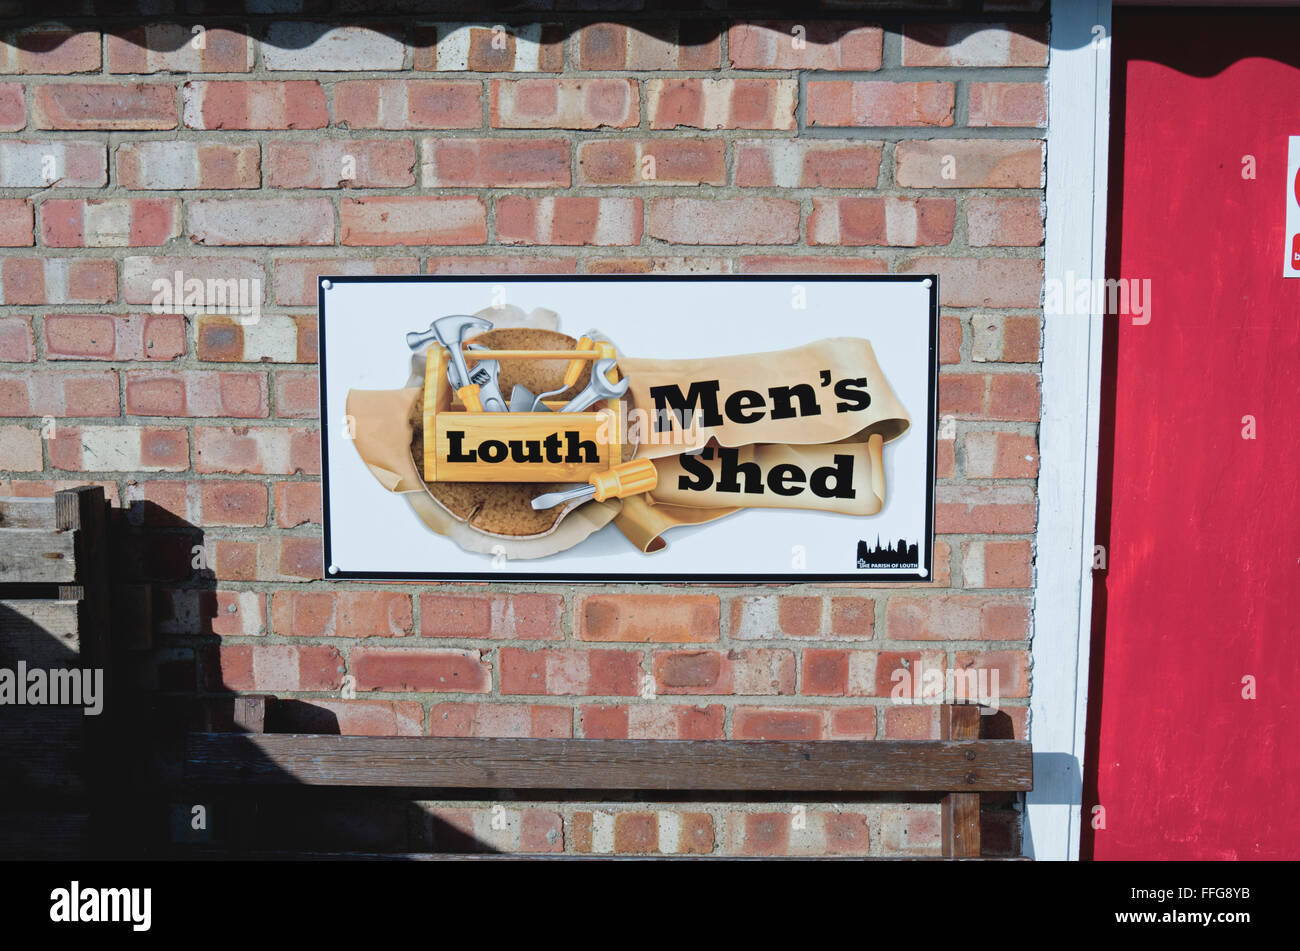 Louth Men's Shed. Stock Photo